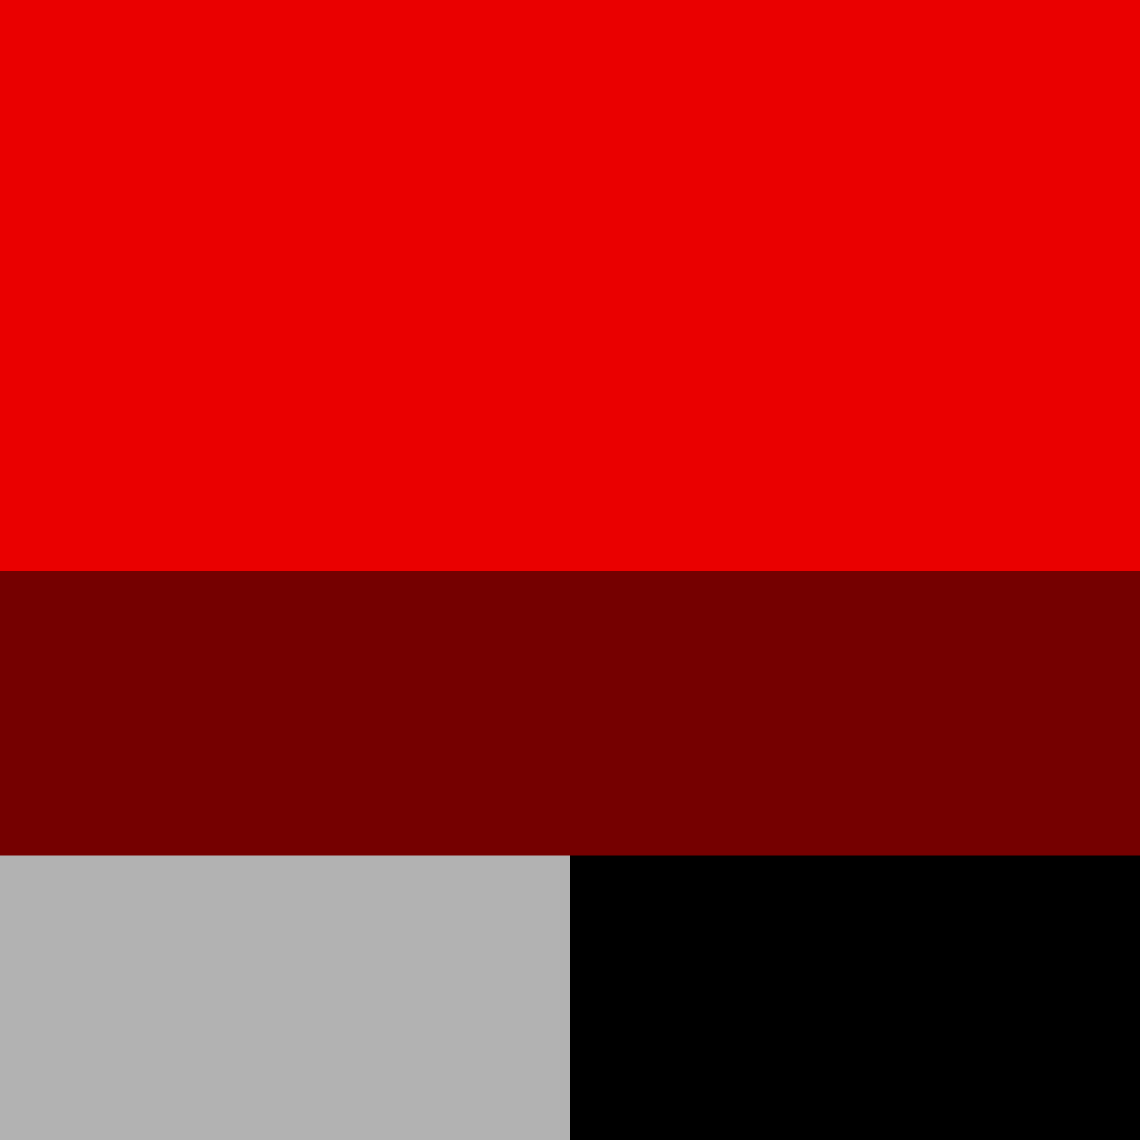 The color palette designed for NEHA showing different shades of red, gray, and black.